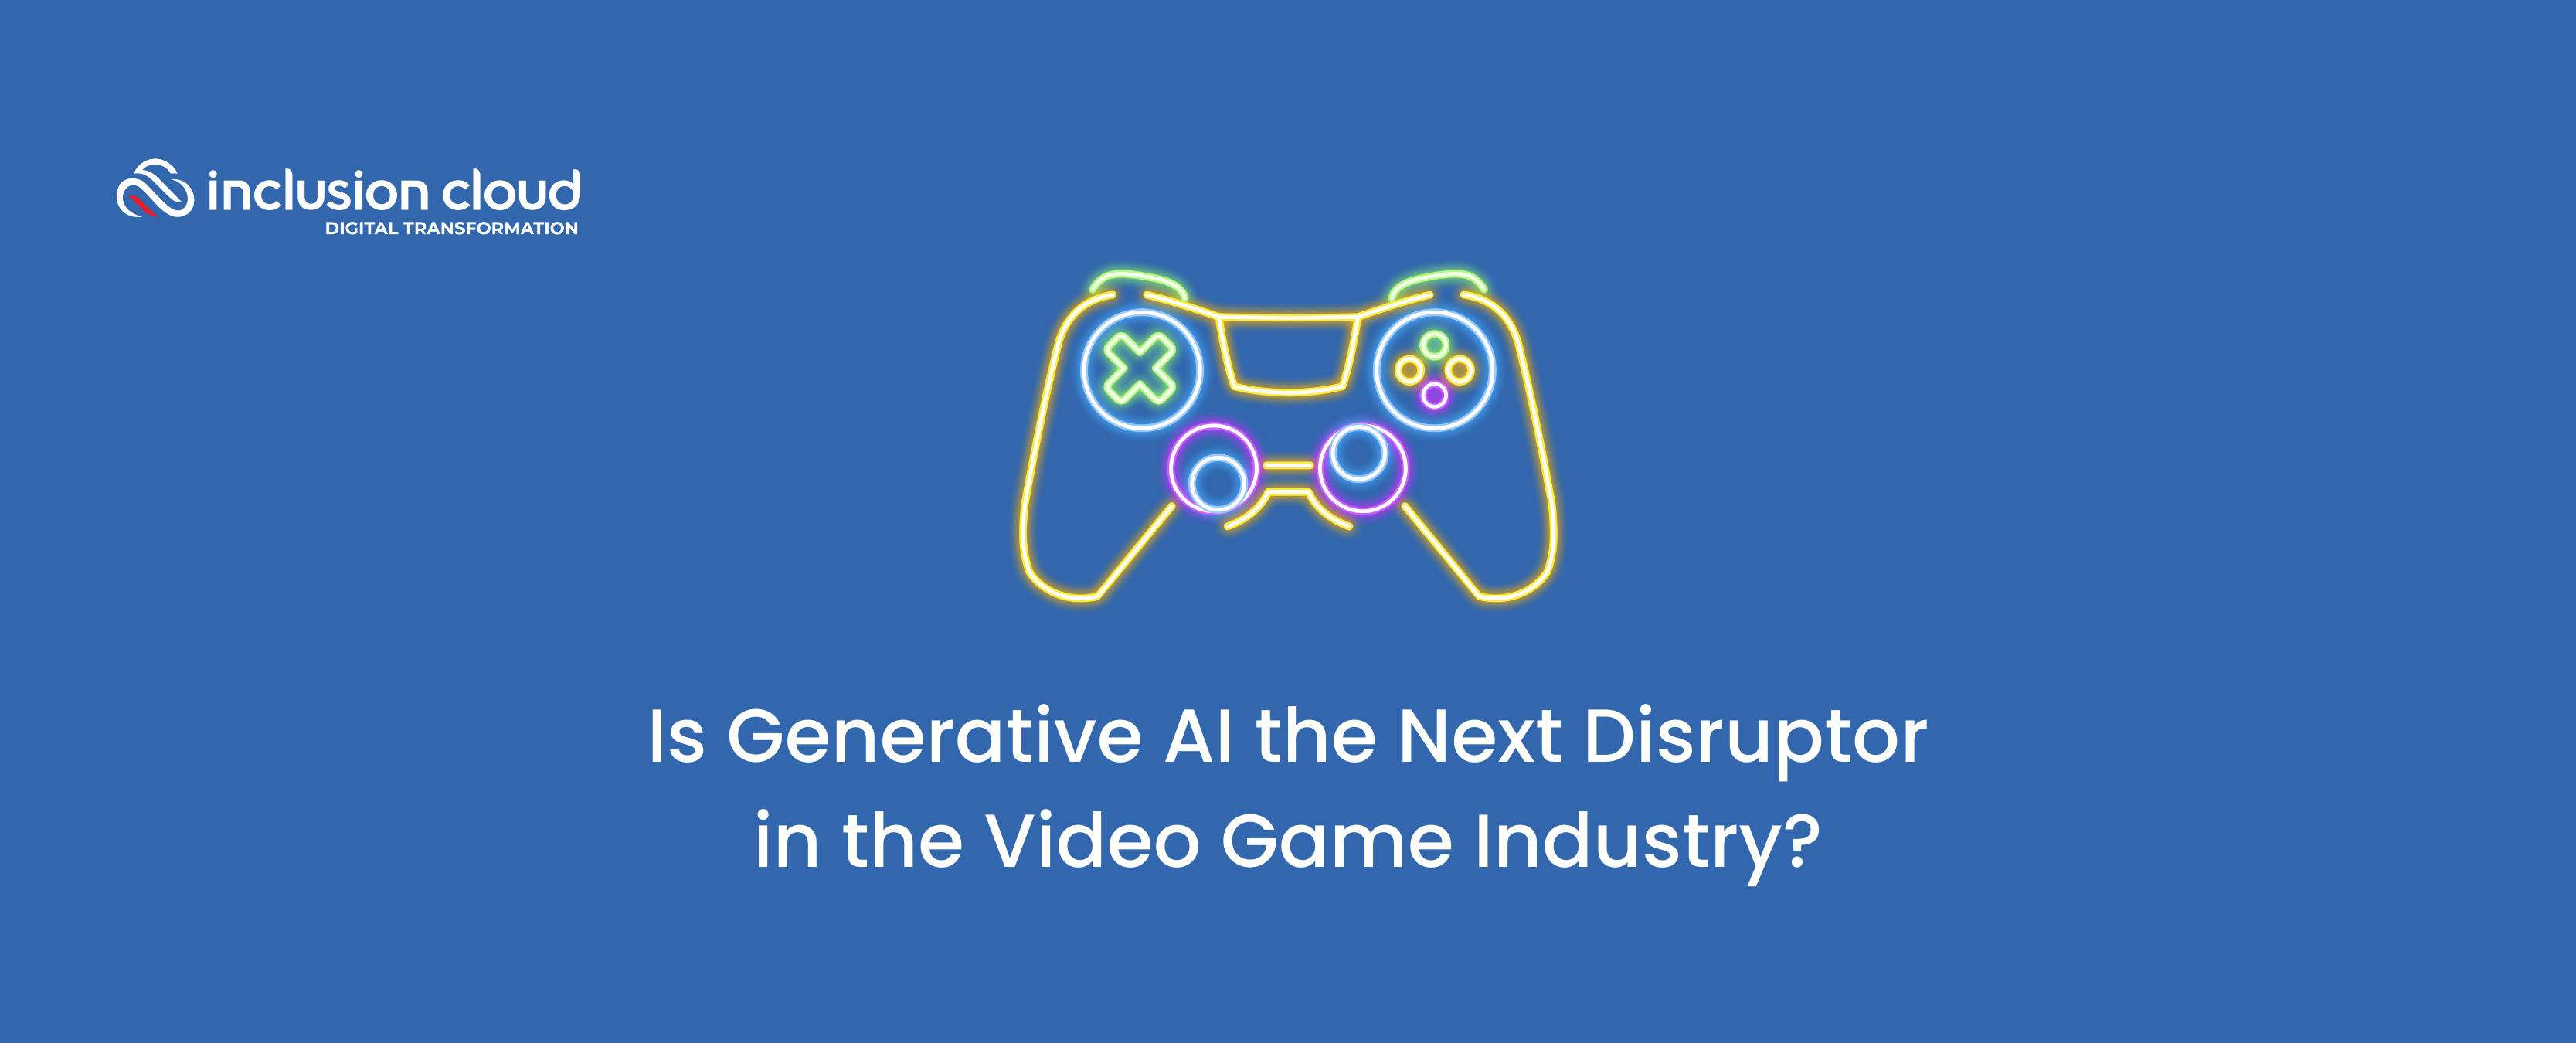 Is Generative AI the Next Disruptor in the Video Game Industry